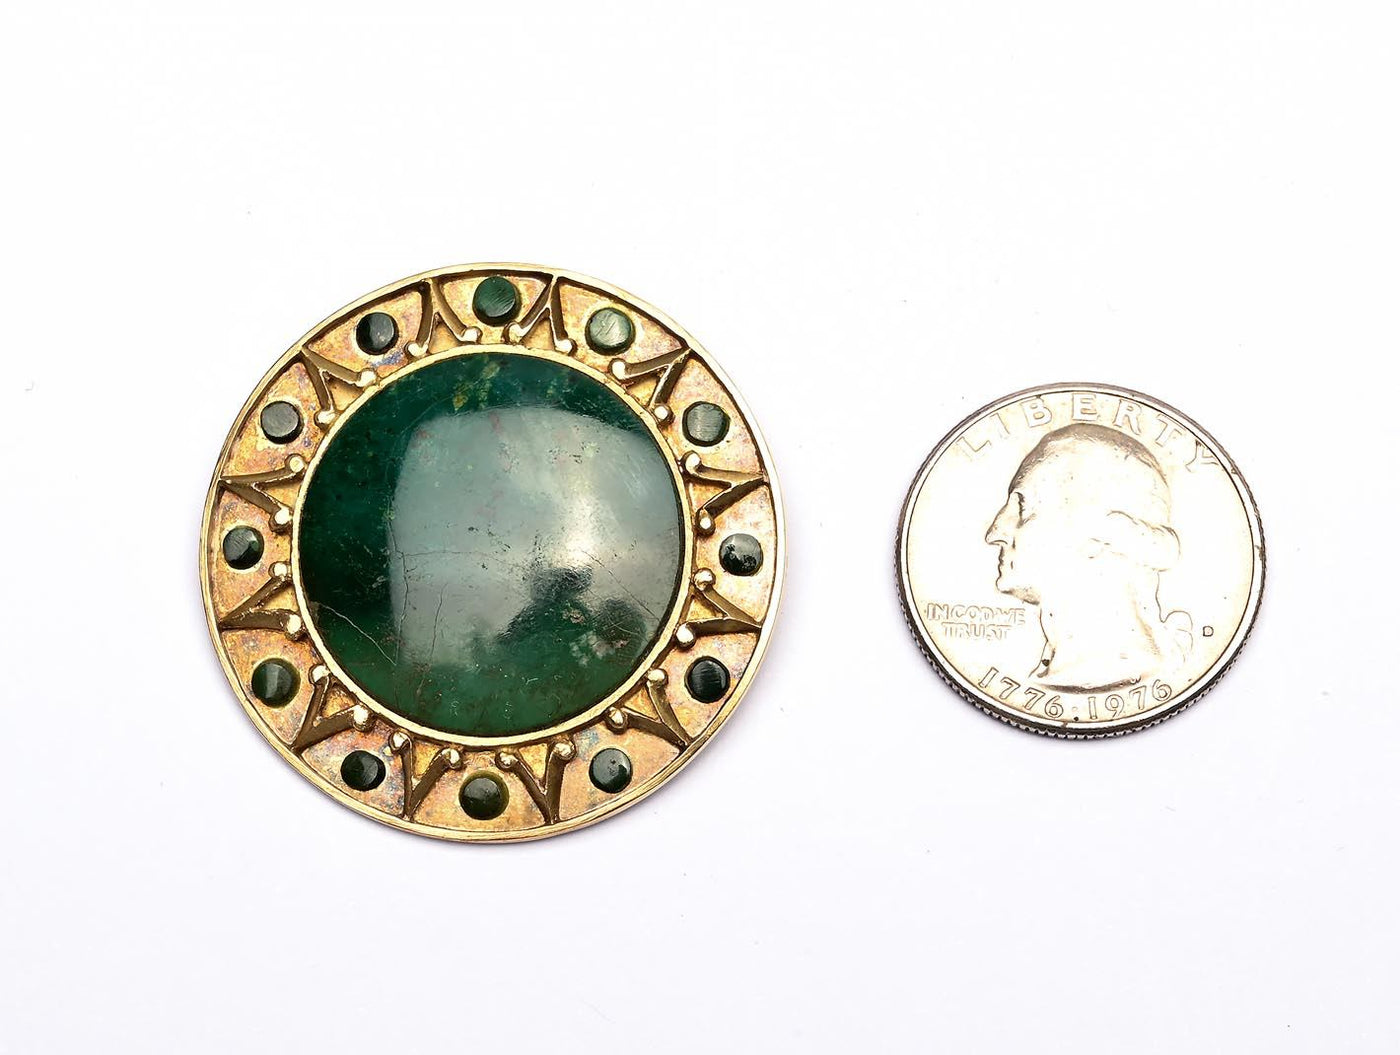 Ledesma-gold-brooch-with-green-agate-1452900-size-comparison